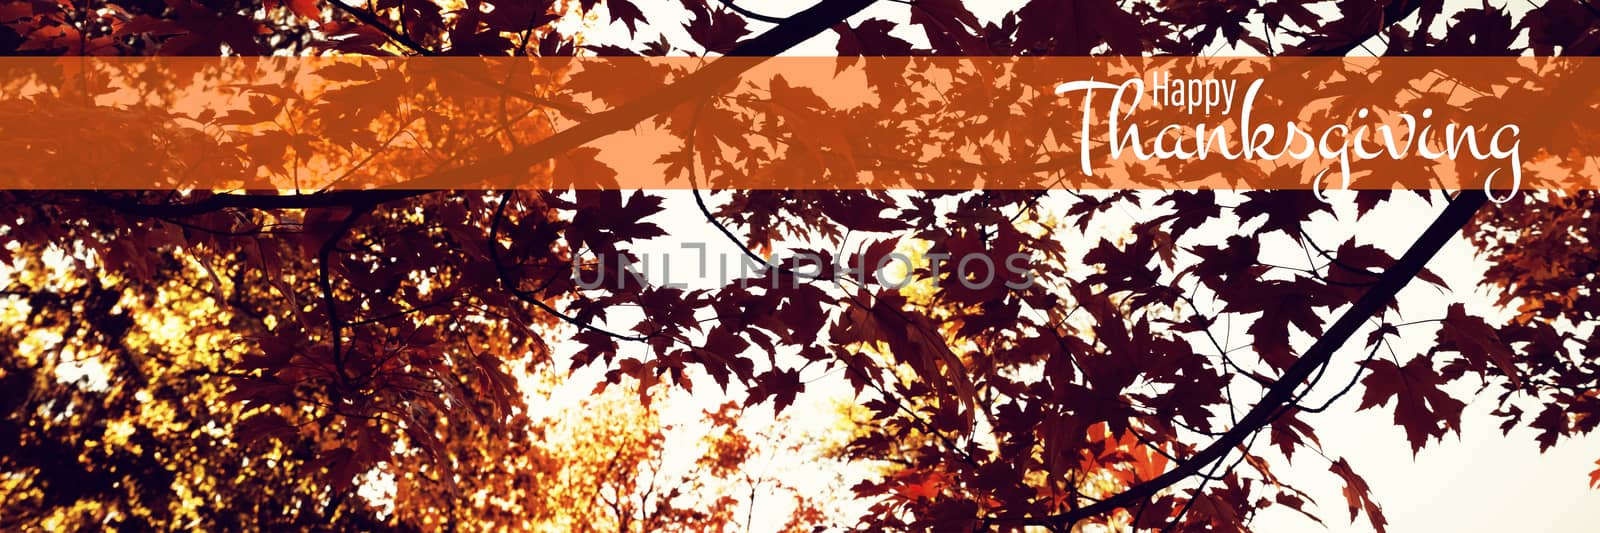 Illustration of happy thanksgiving day text greeting against branch of maple leaves in autumn